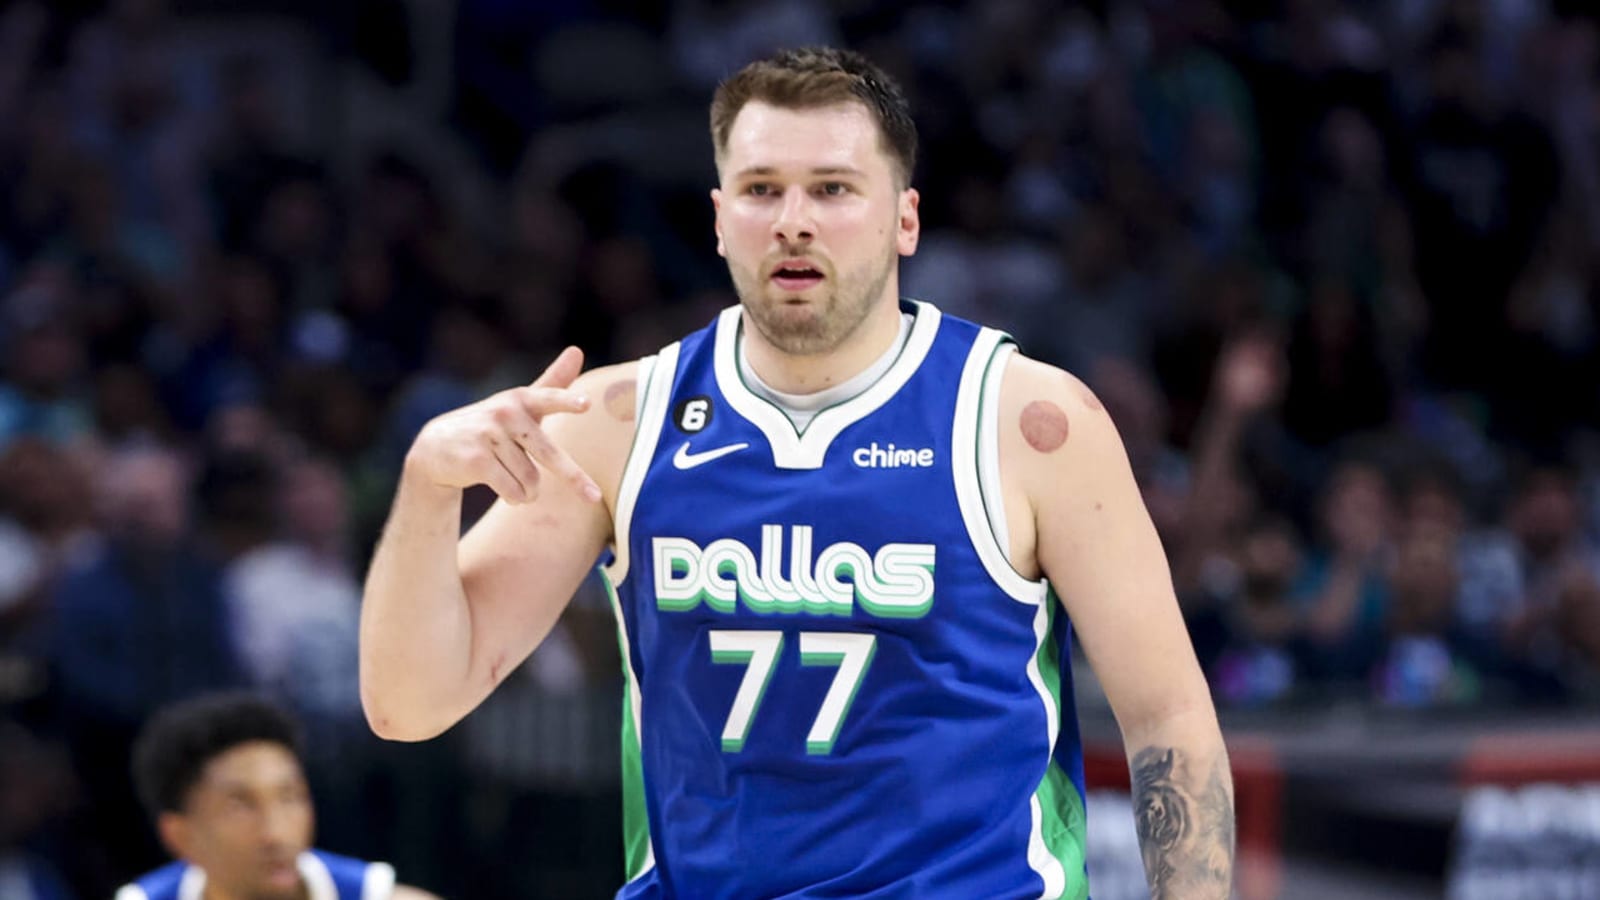 Watch: Luka Doncic threads the needle